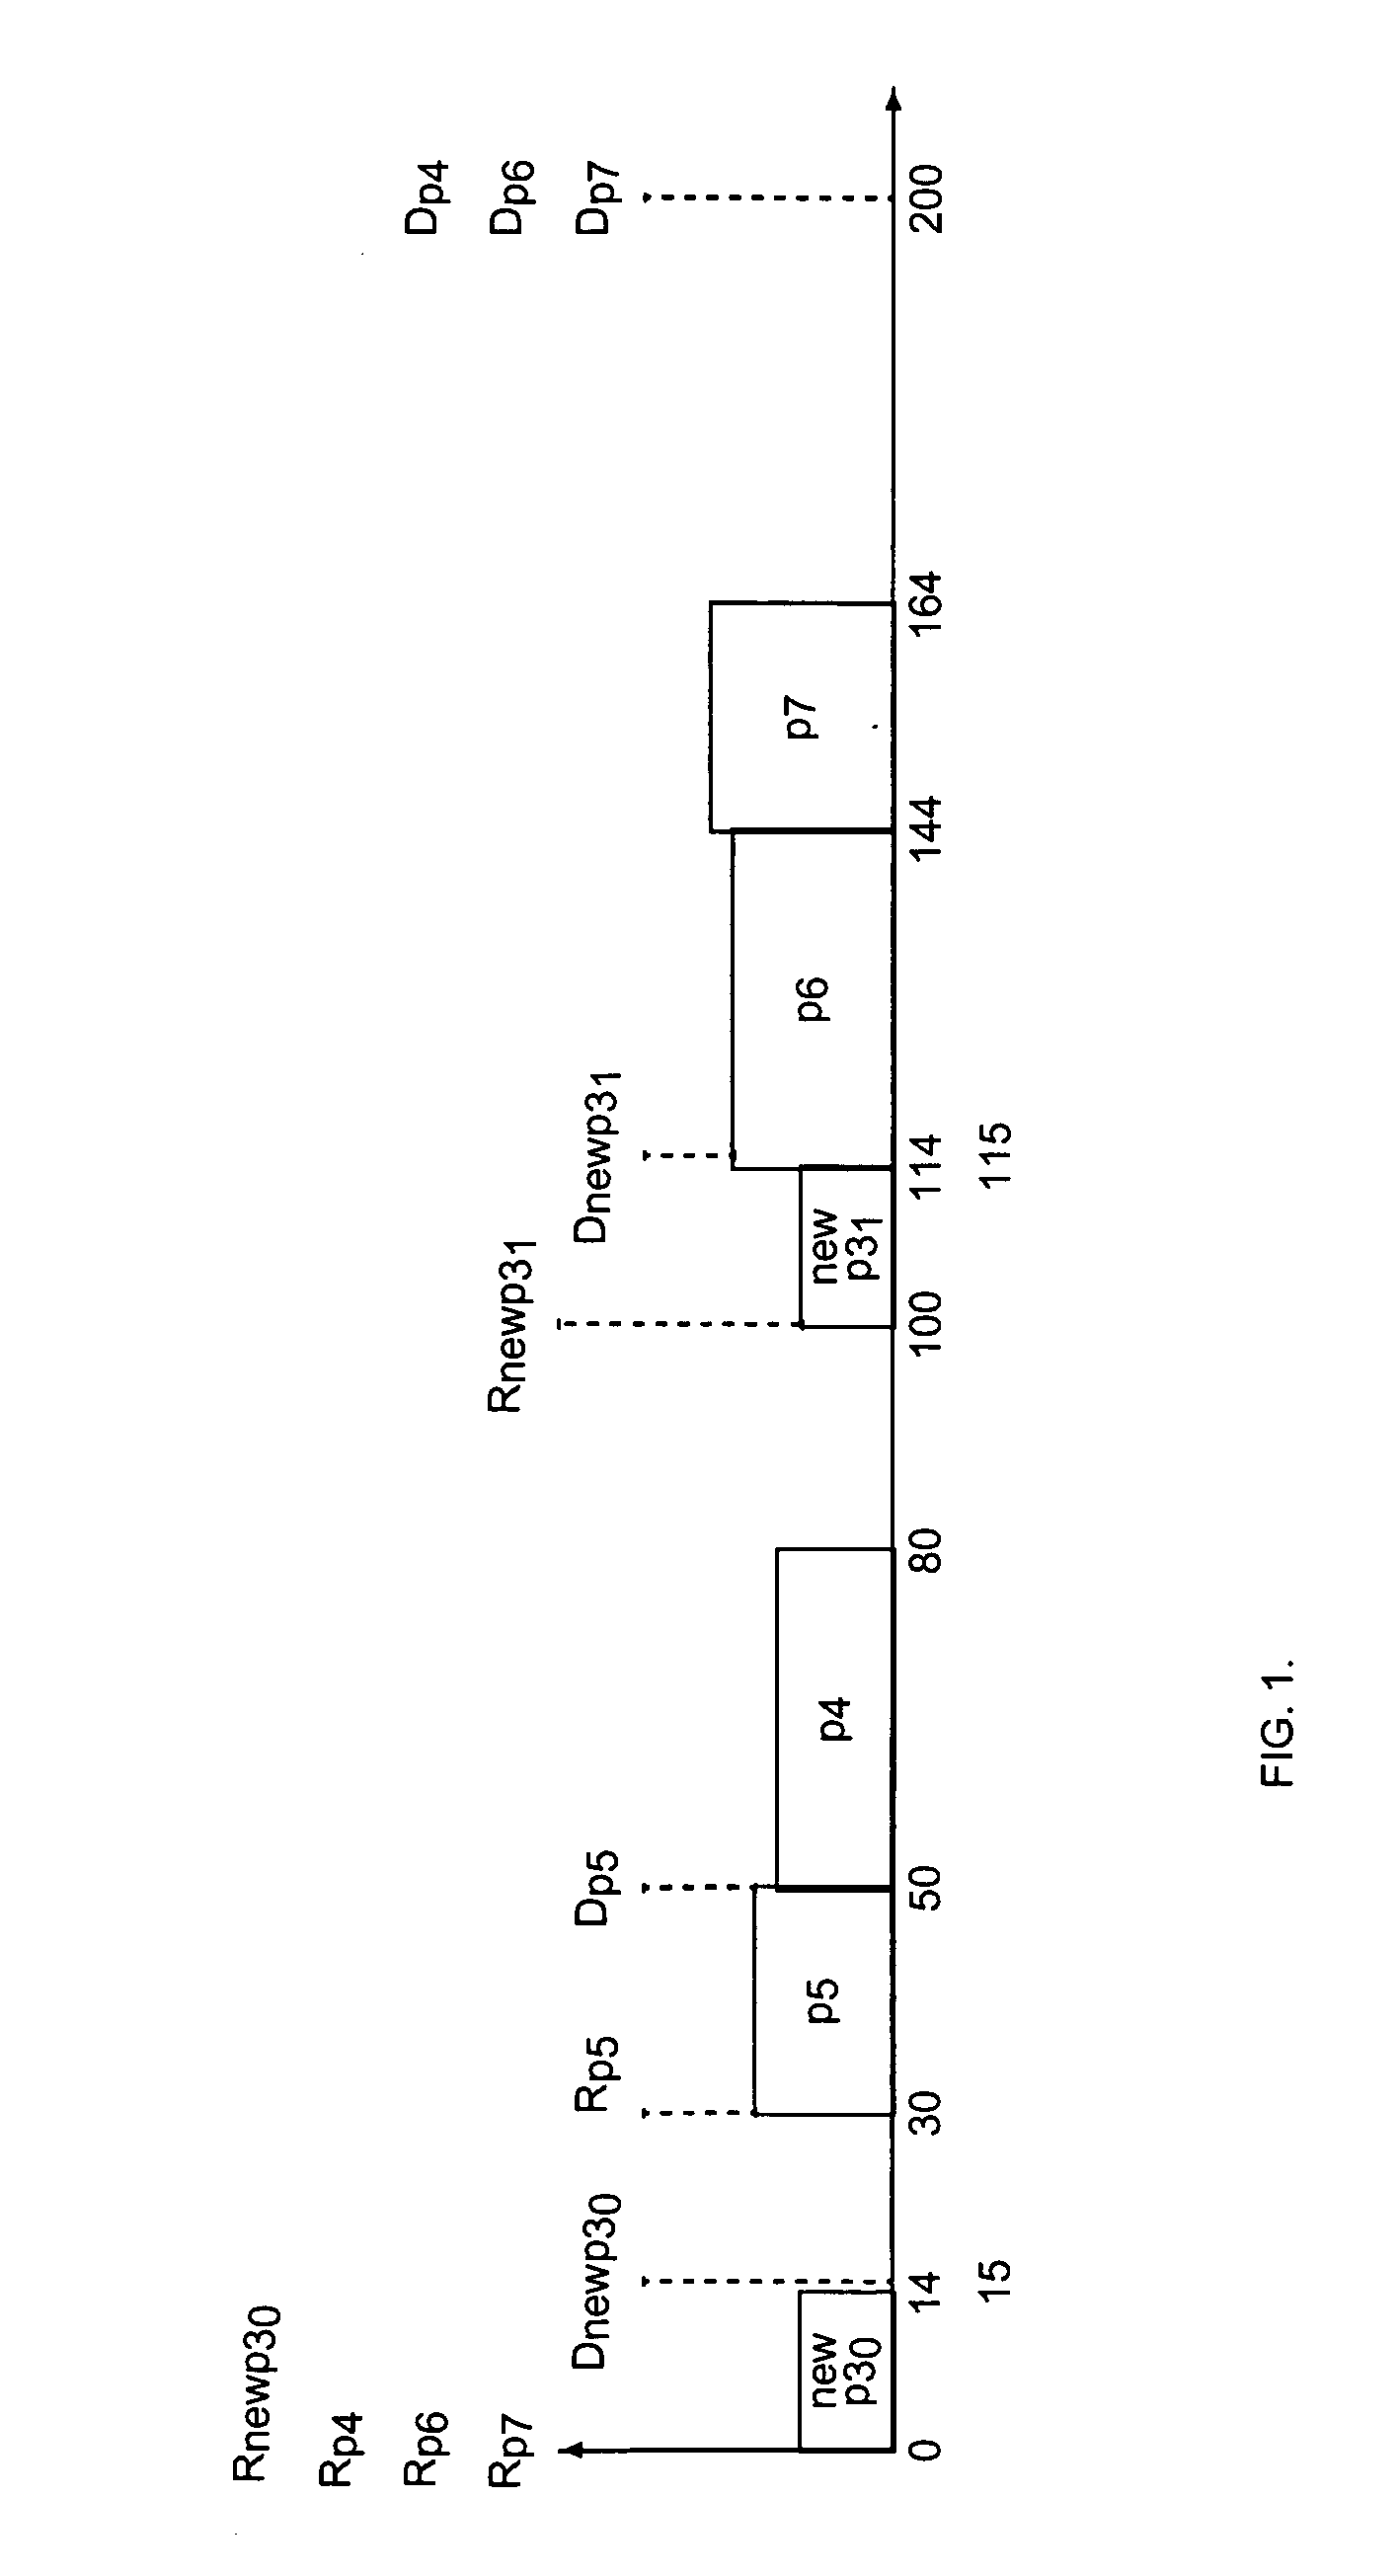 Method of scheduling executions of processes with various types of timing properties and constraints